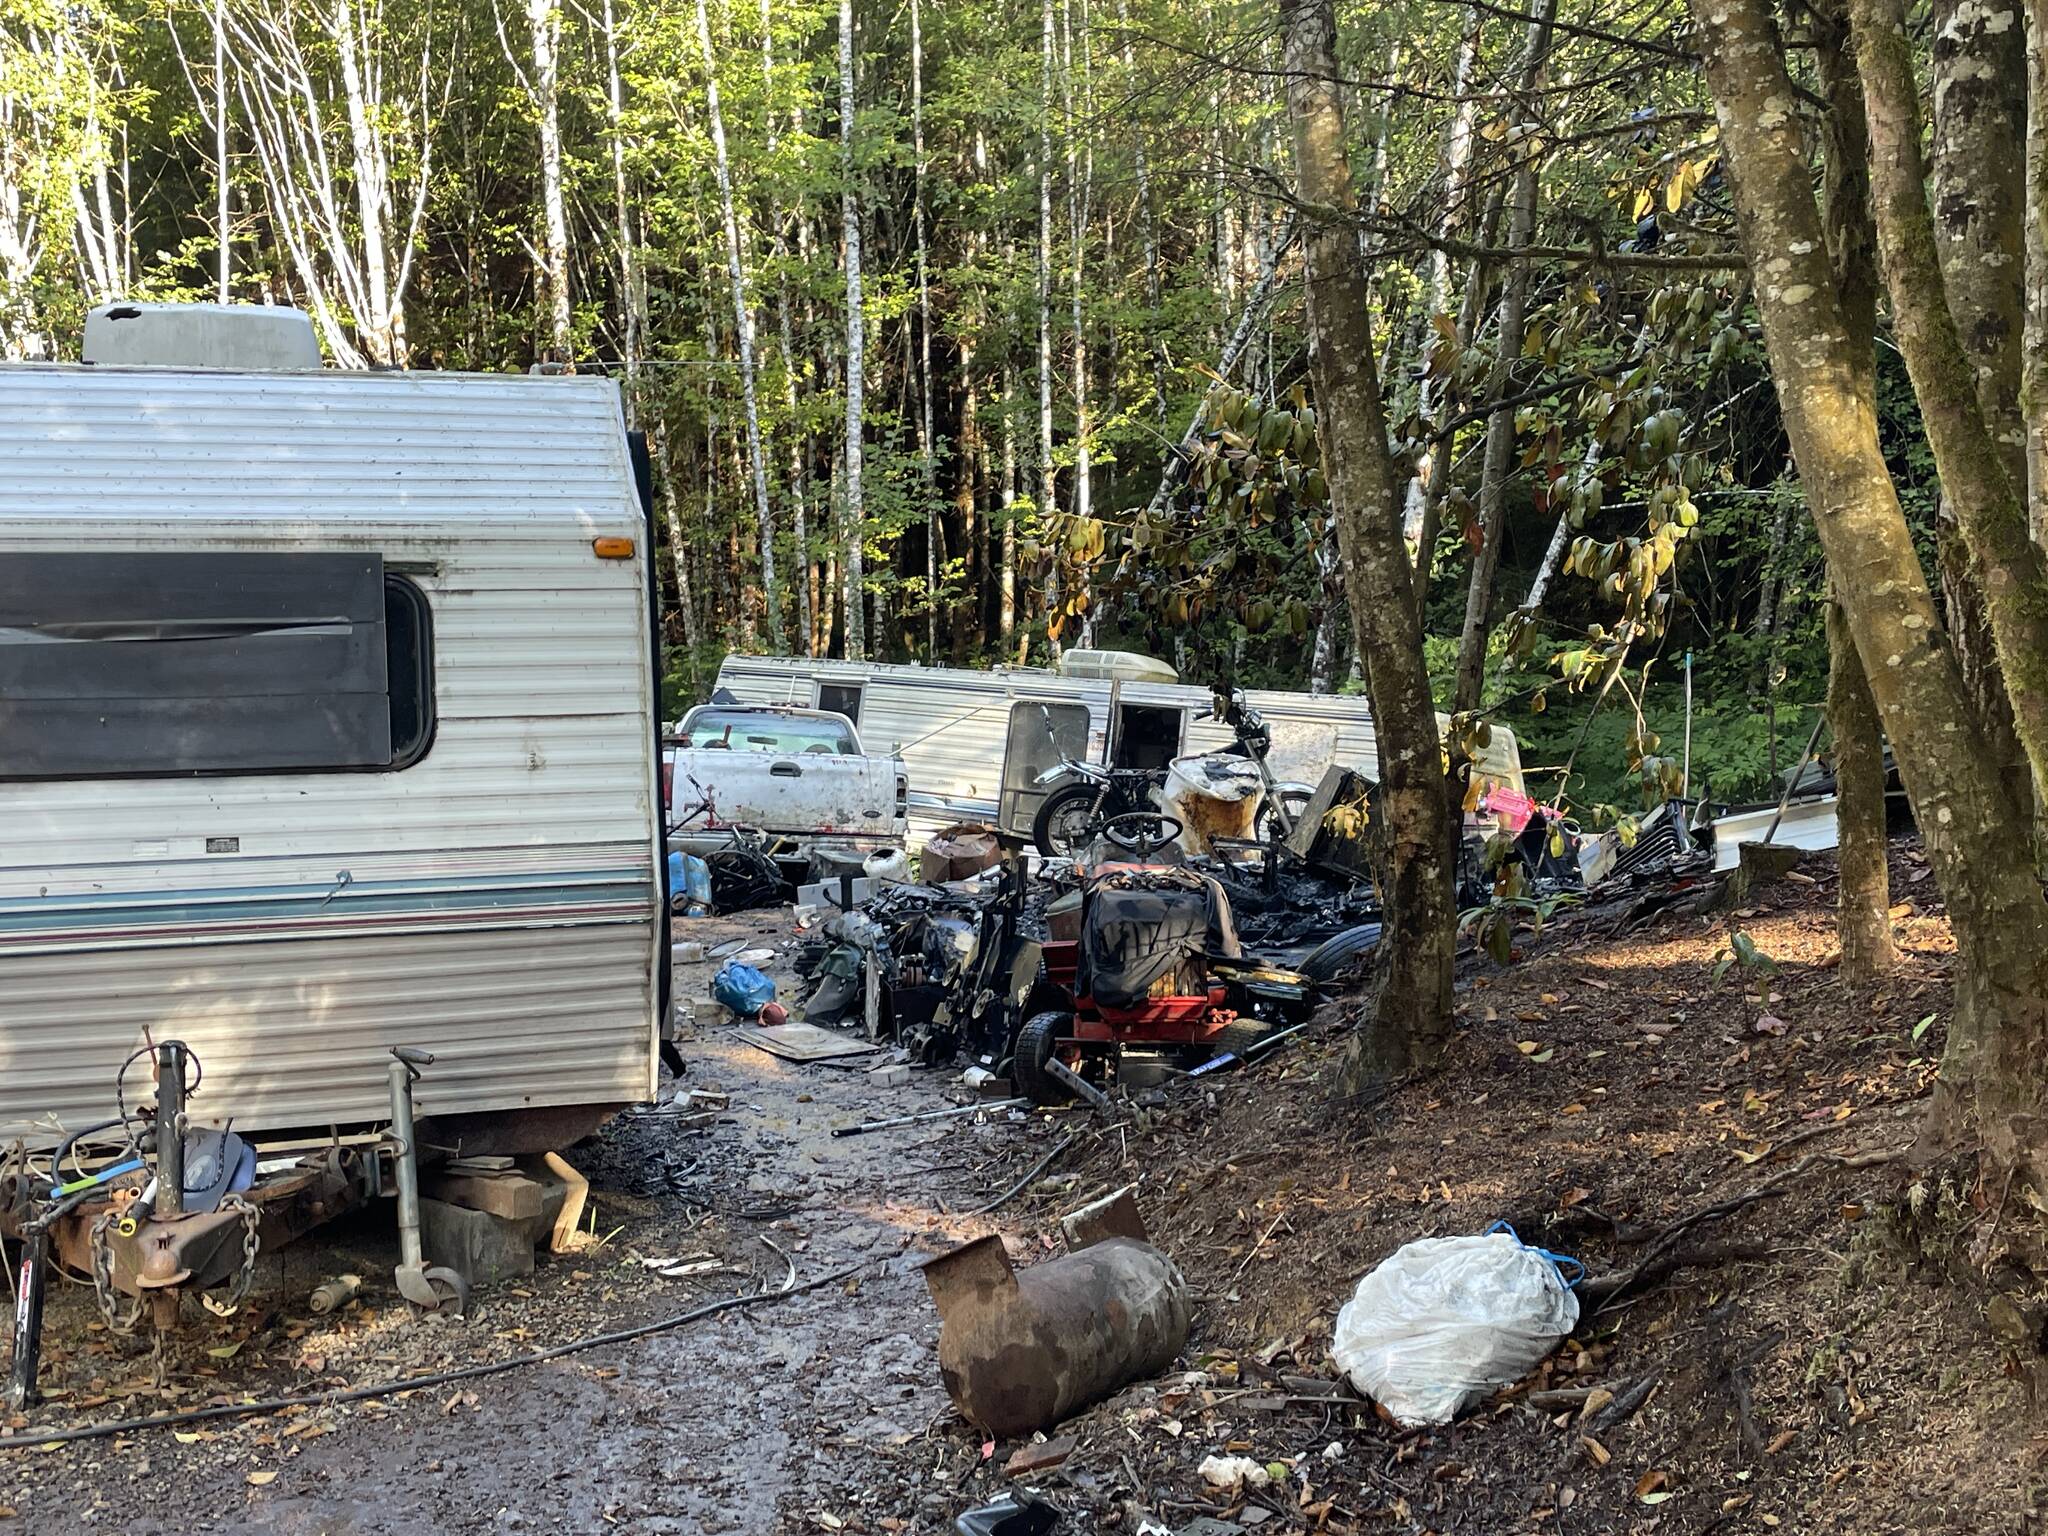 A fire on Thursday morning completely destroyed a trailer, visible on the right, in a camp off State Route 105. (Michael S. Lockett / The Daily World)